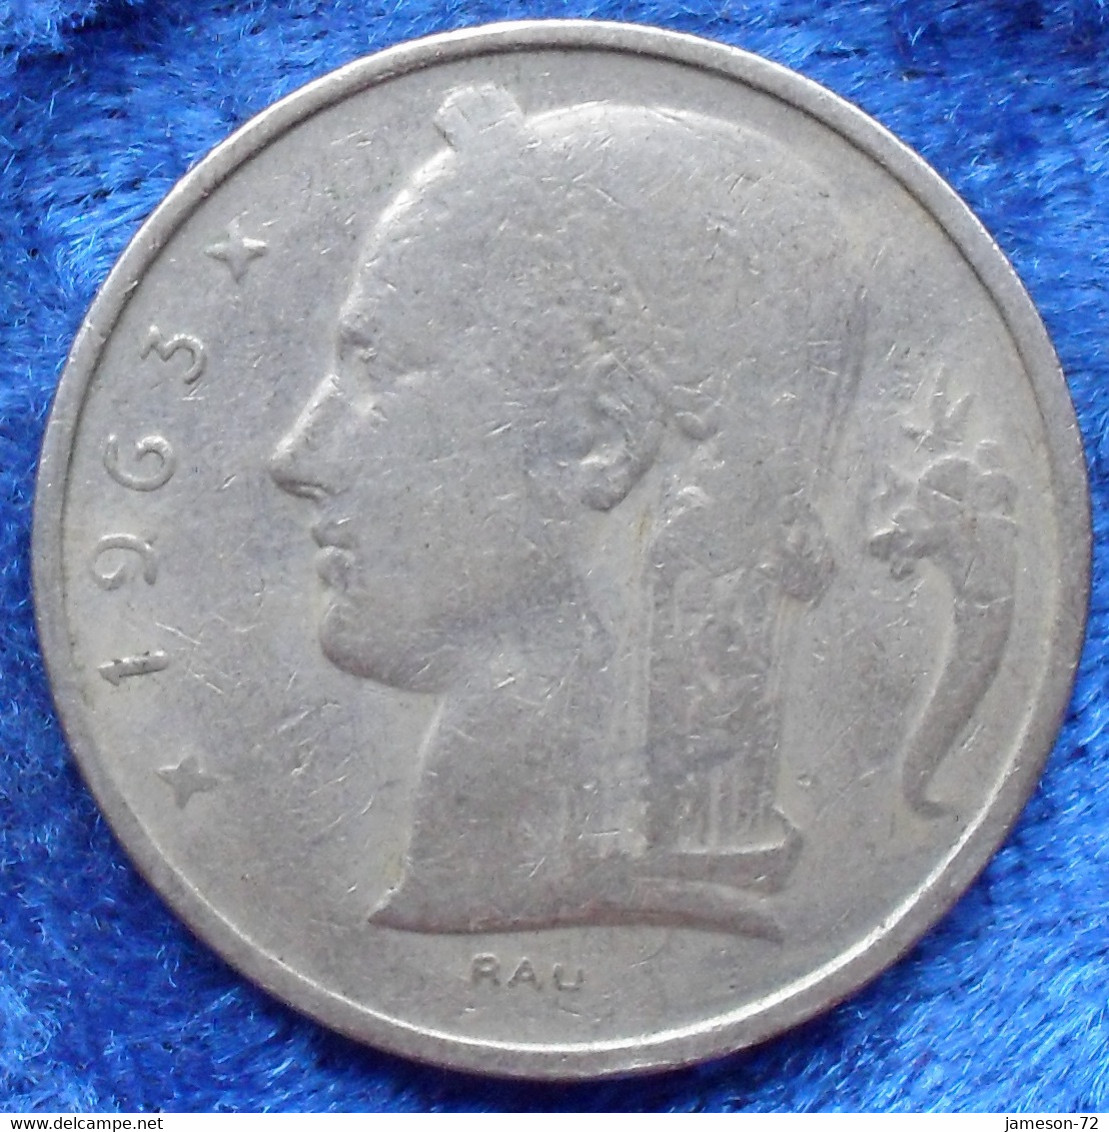 BELGIUM - 5 Francs 1963 French KM#134.1 Baudouin I (1951-1993) - Edelweiss Coins - Unclassified